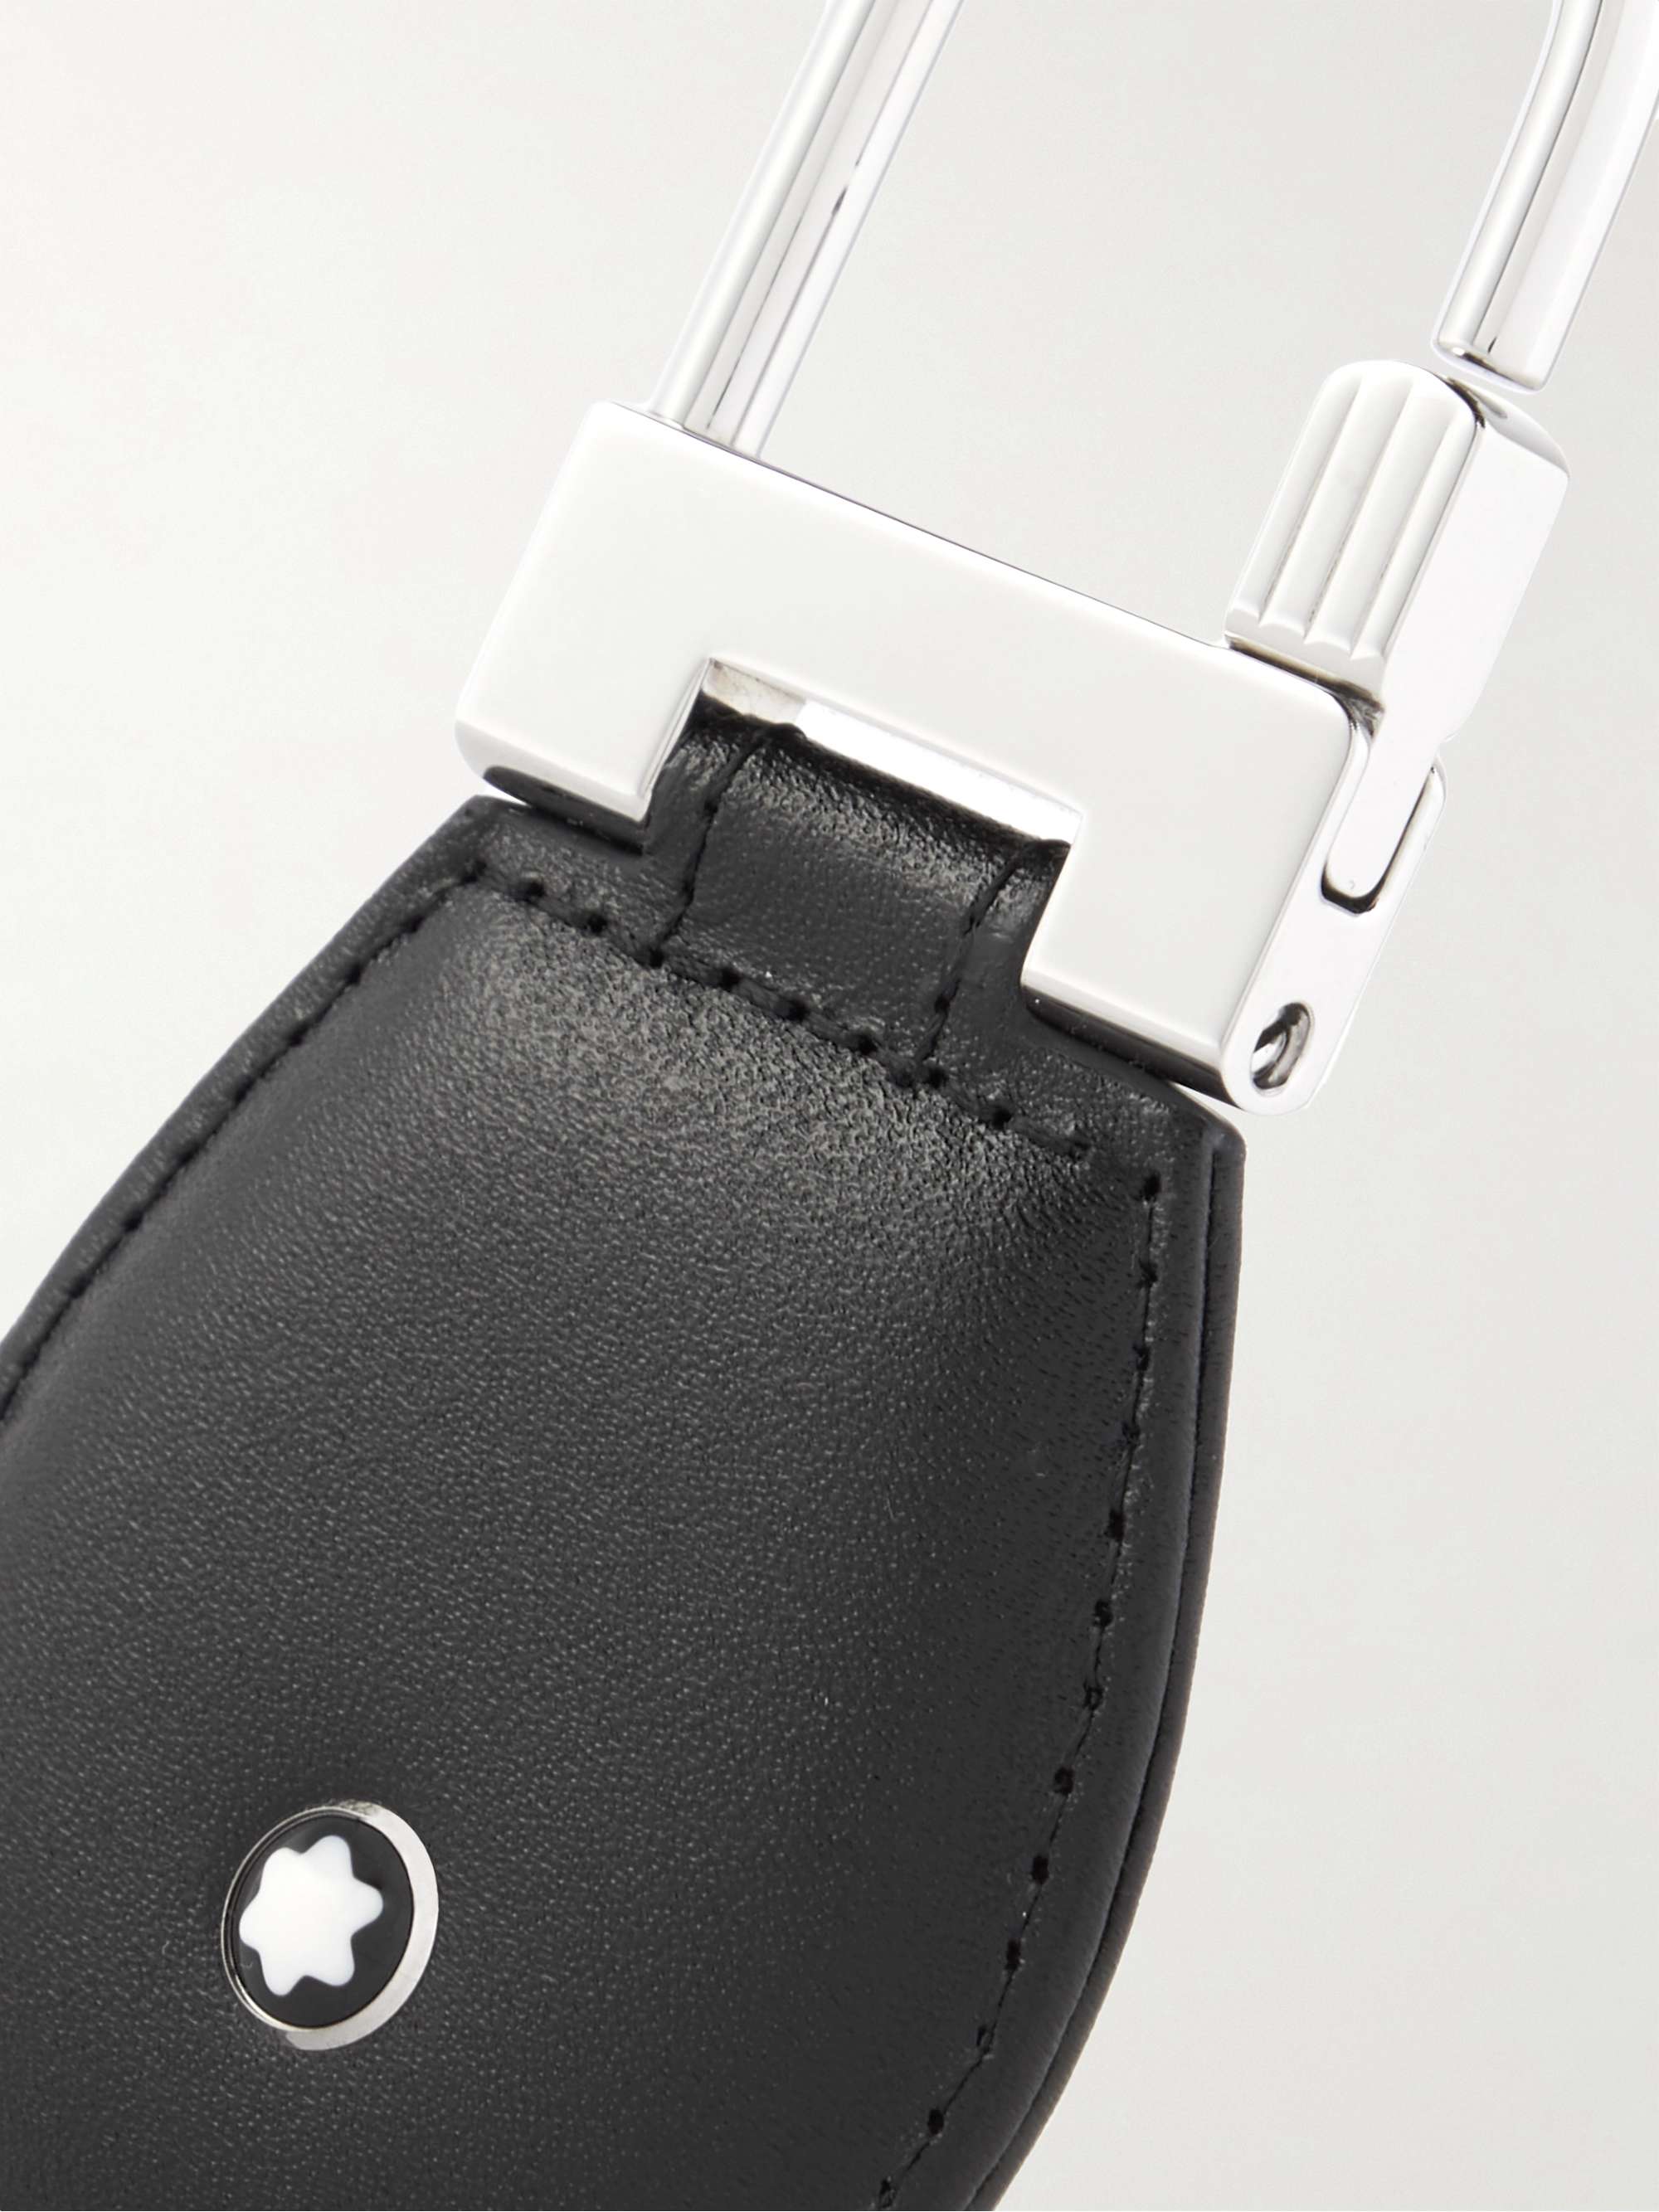 MONTBLANC Meisterstück Leather and Palladium-Plated Key Fob